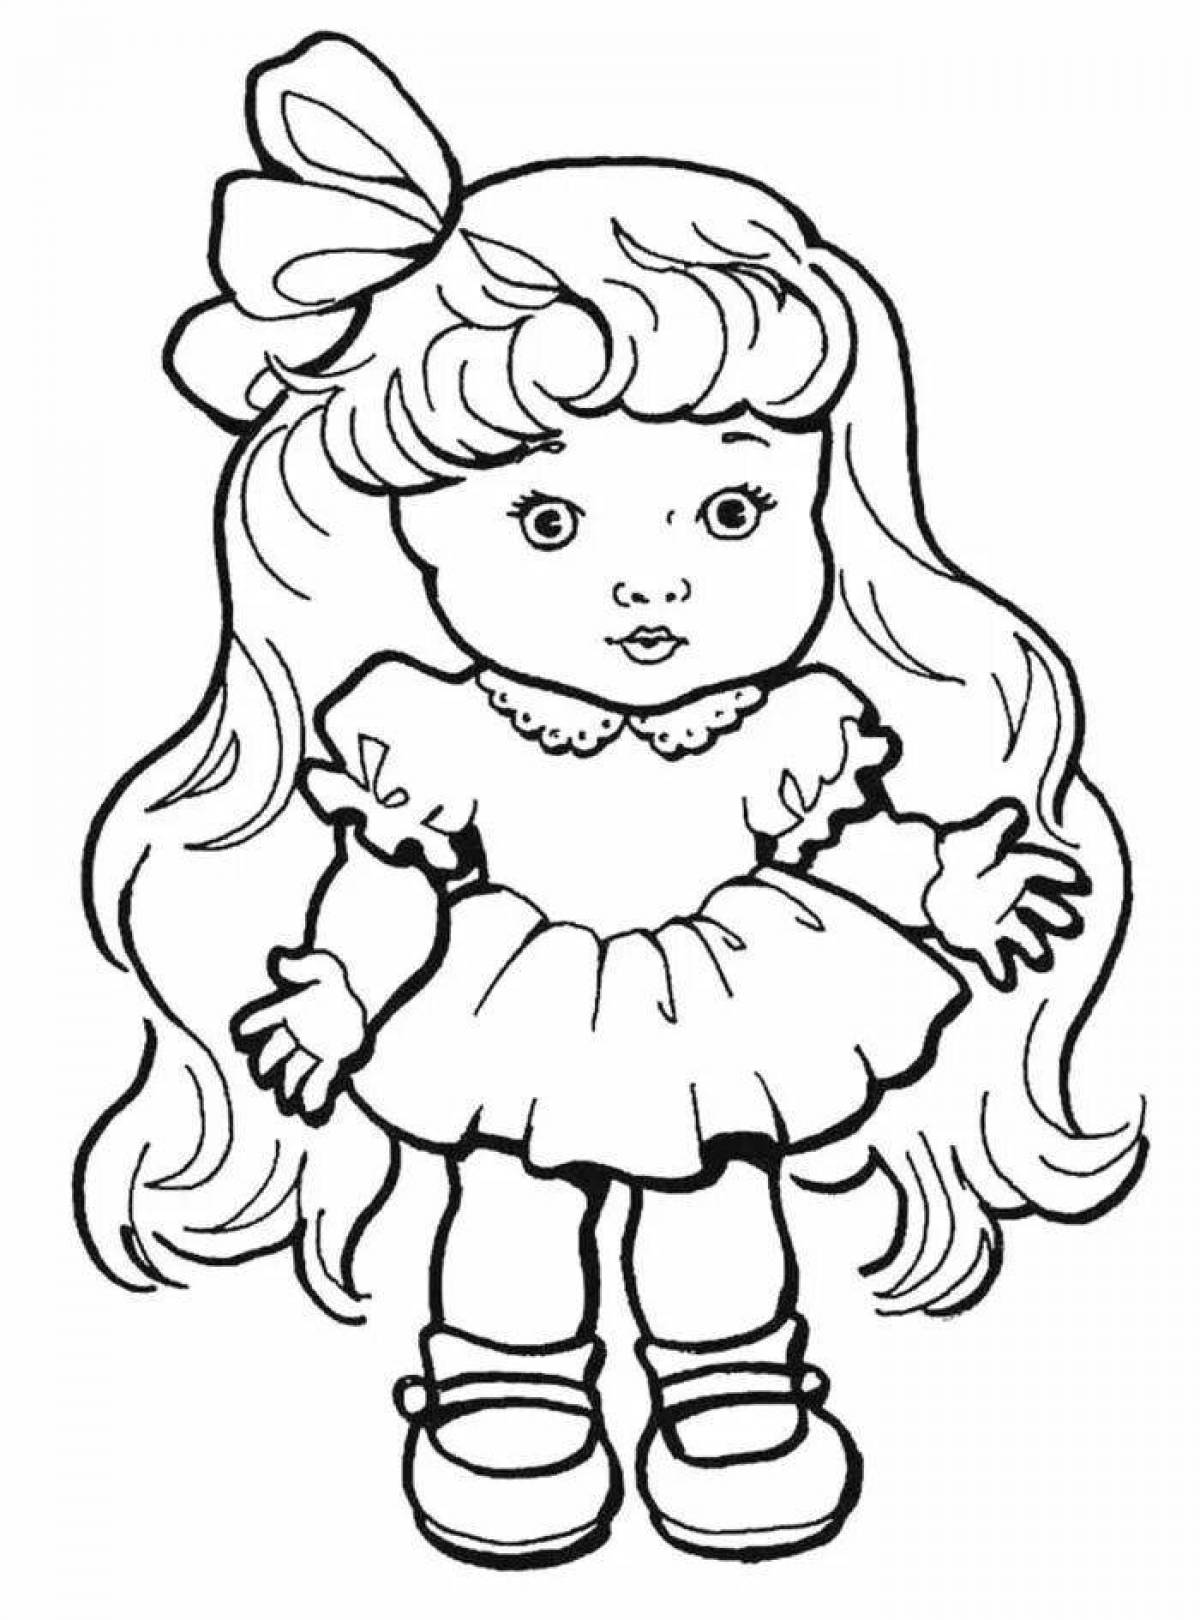 Fun coloring doll for children